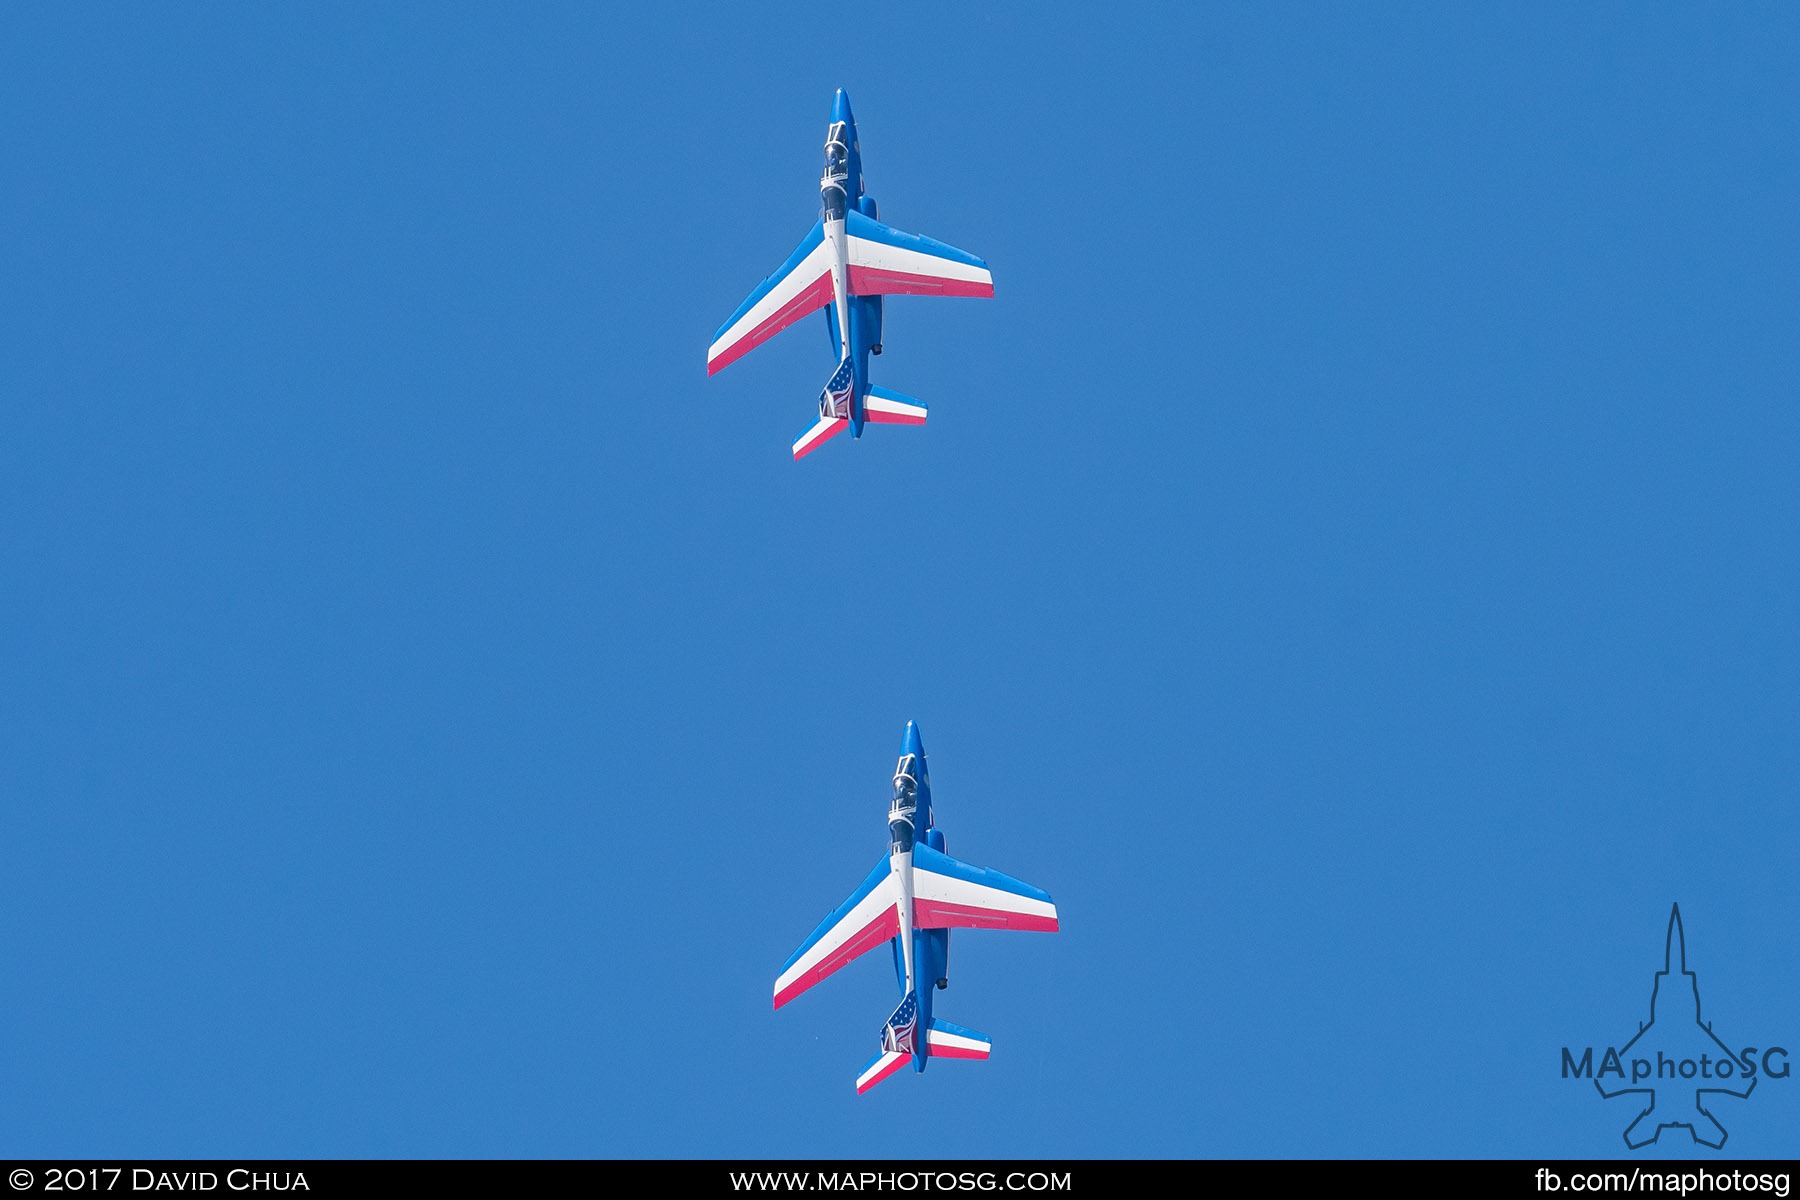 5. The Patrouille de France Aerobatic Display Team of the French Air Force wowed visitors on the opening day and the last three public days of the show with their precision flying